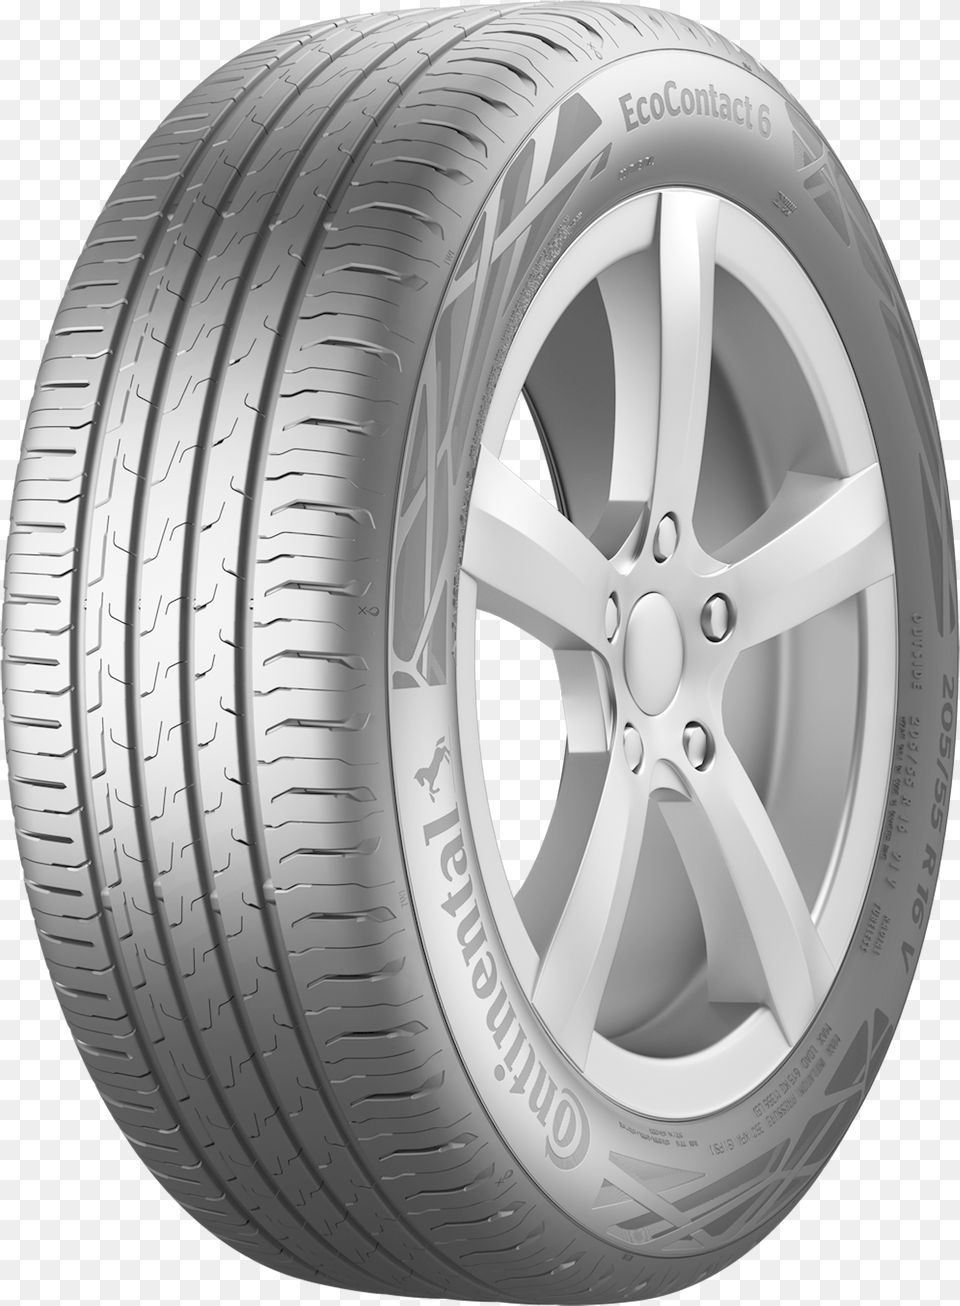 Tyre Continental, Alloy Wheel, Car, Car Wheel, Machine Png Image